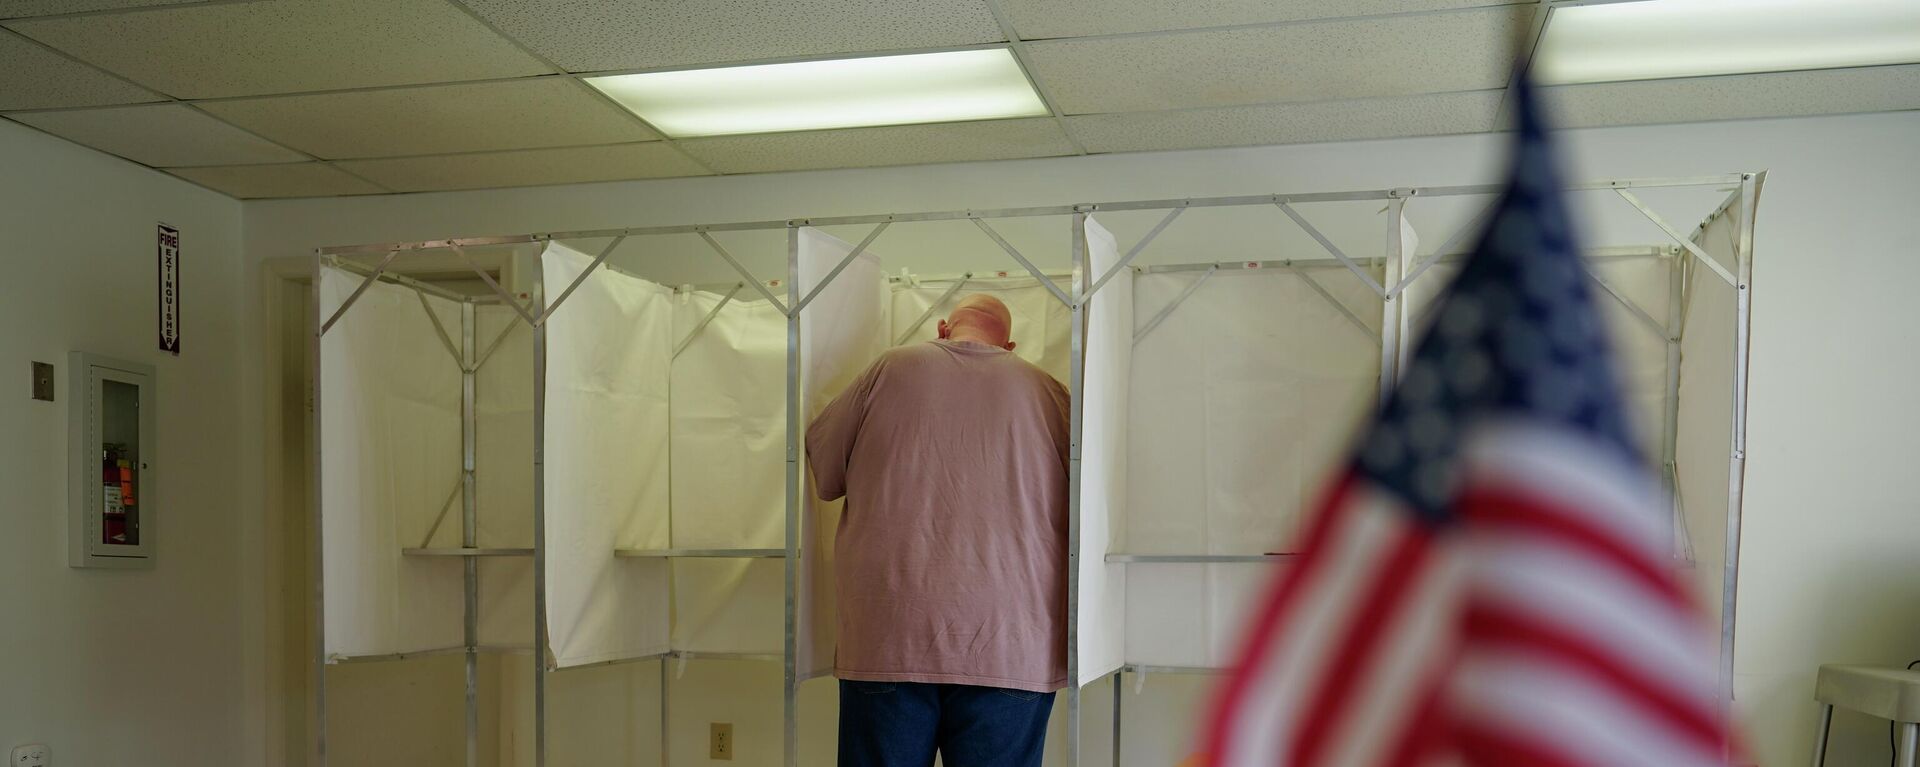 FILE - A voter fills out a ballot during the Pennsylvania primary election at the Michaux Manor Living Center in Fayetteville, Pa., May 17, 2022. As the 2022 midterm elections enter their final two-month sprint, leading Republicans concede that their party's advantage may be slipping even as Democrats confront their president's weak standing, deep voter pessimism and the weight of history this fall. - Sputnik International, 1920, 07.11.2022